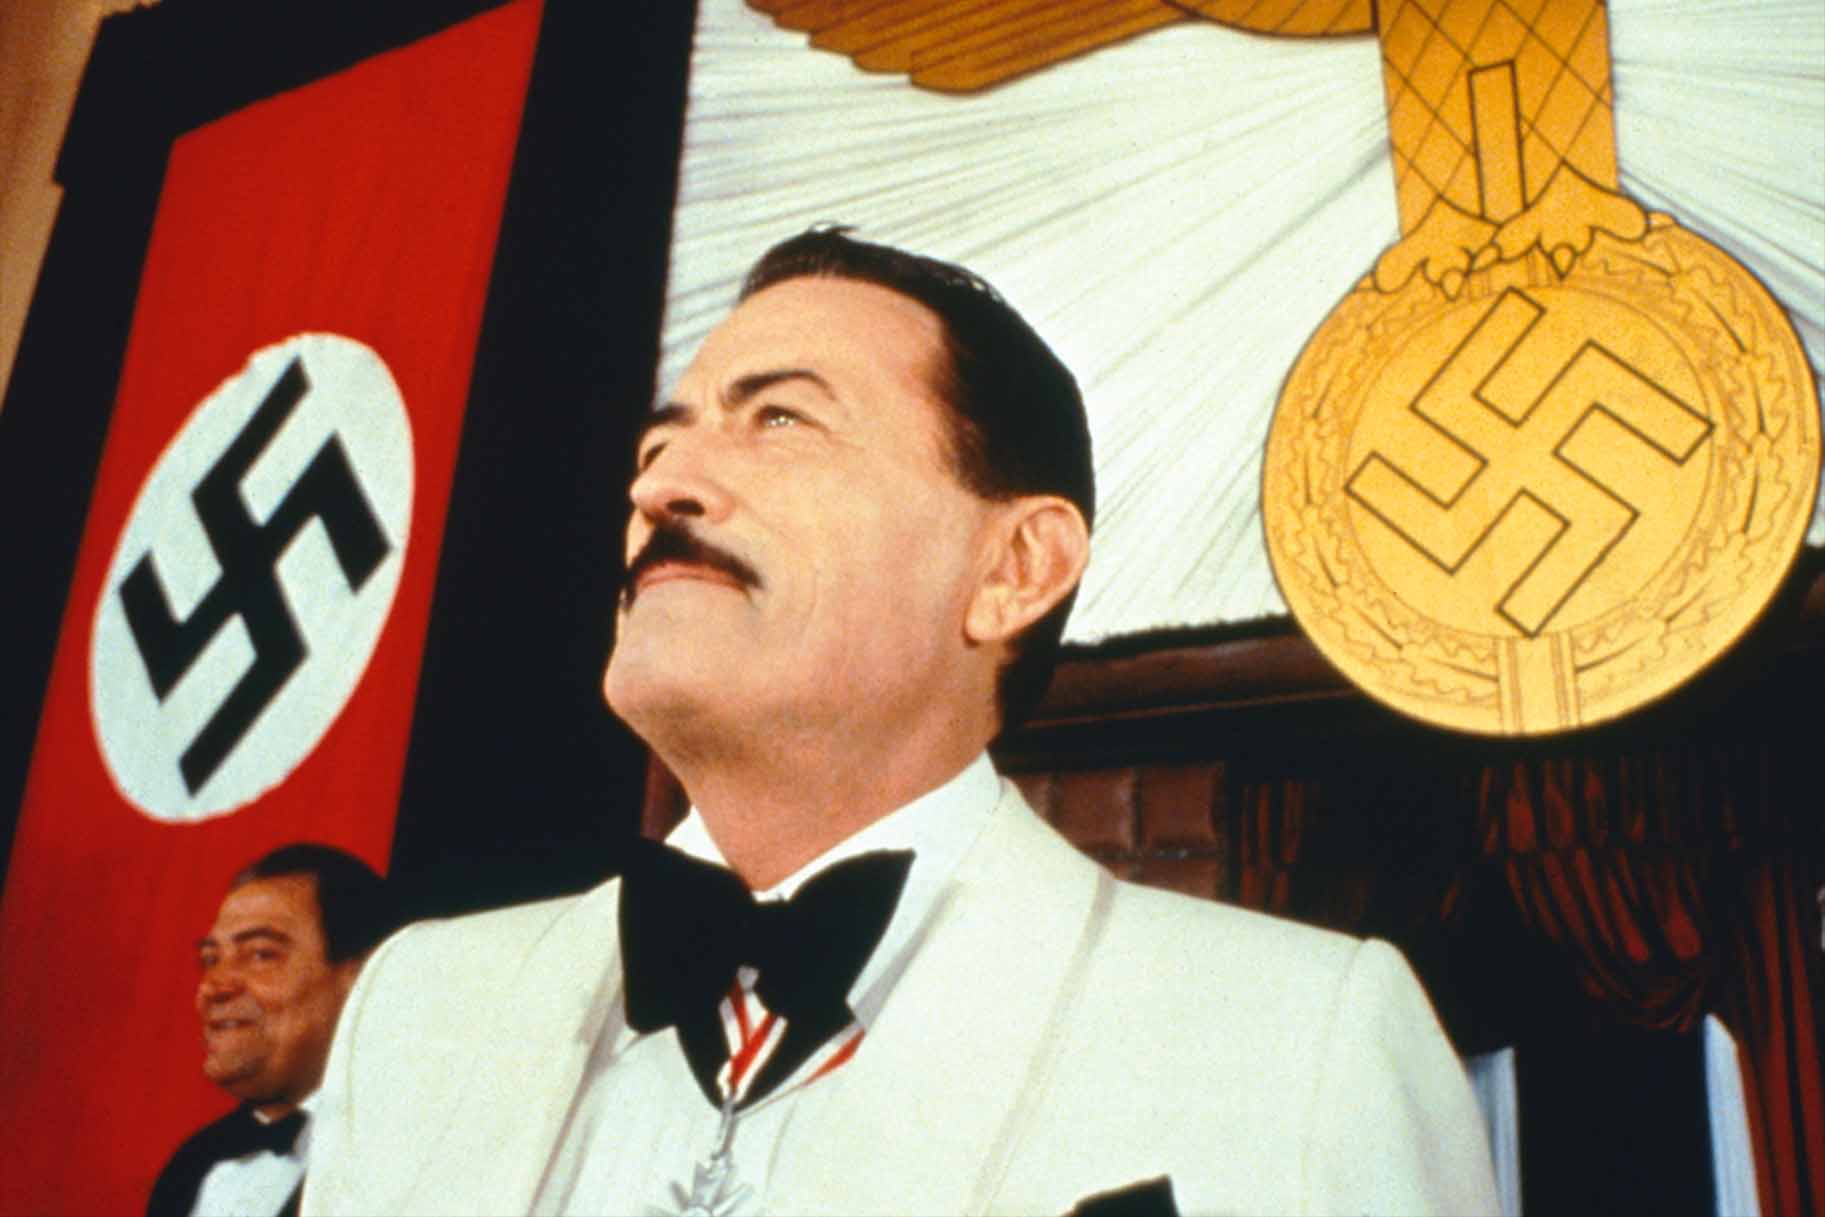 Dr. Josef Mengele (Gregory Peck) appears with the Nazi flag and decorations behind him in The Boys from Brazil (1978).